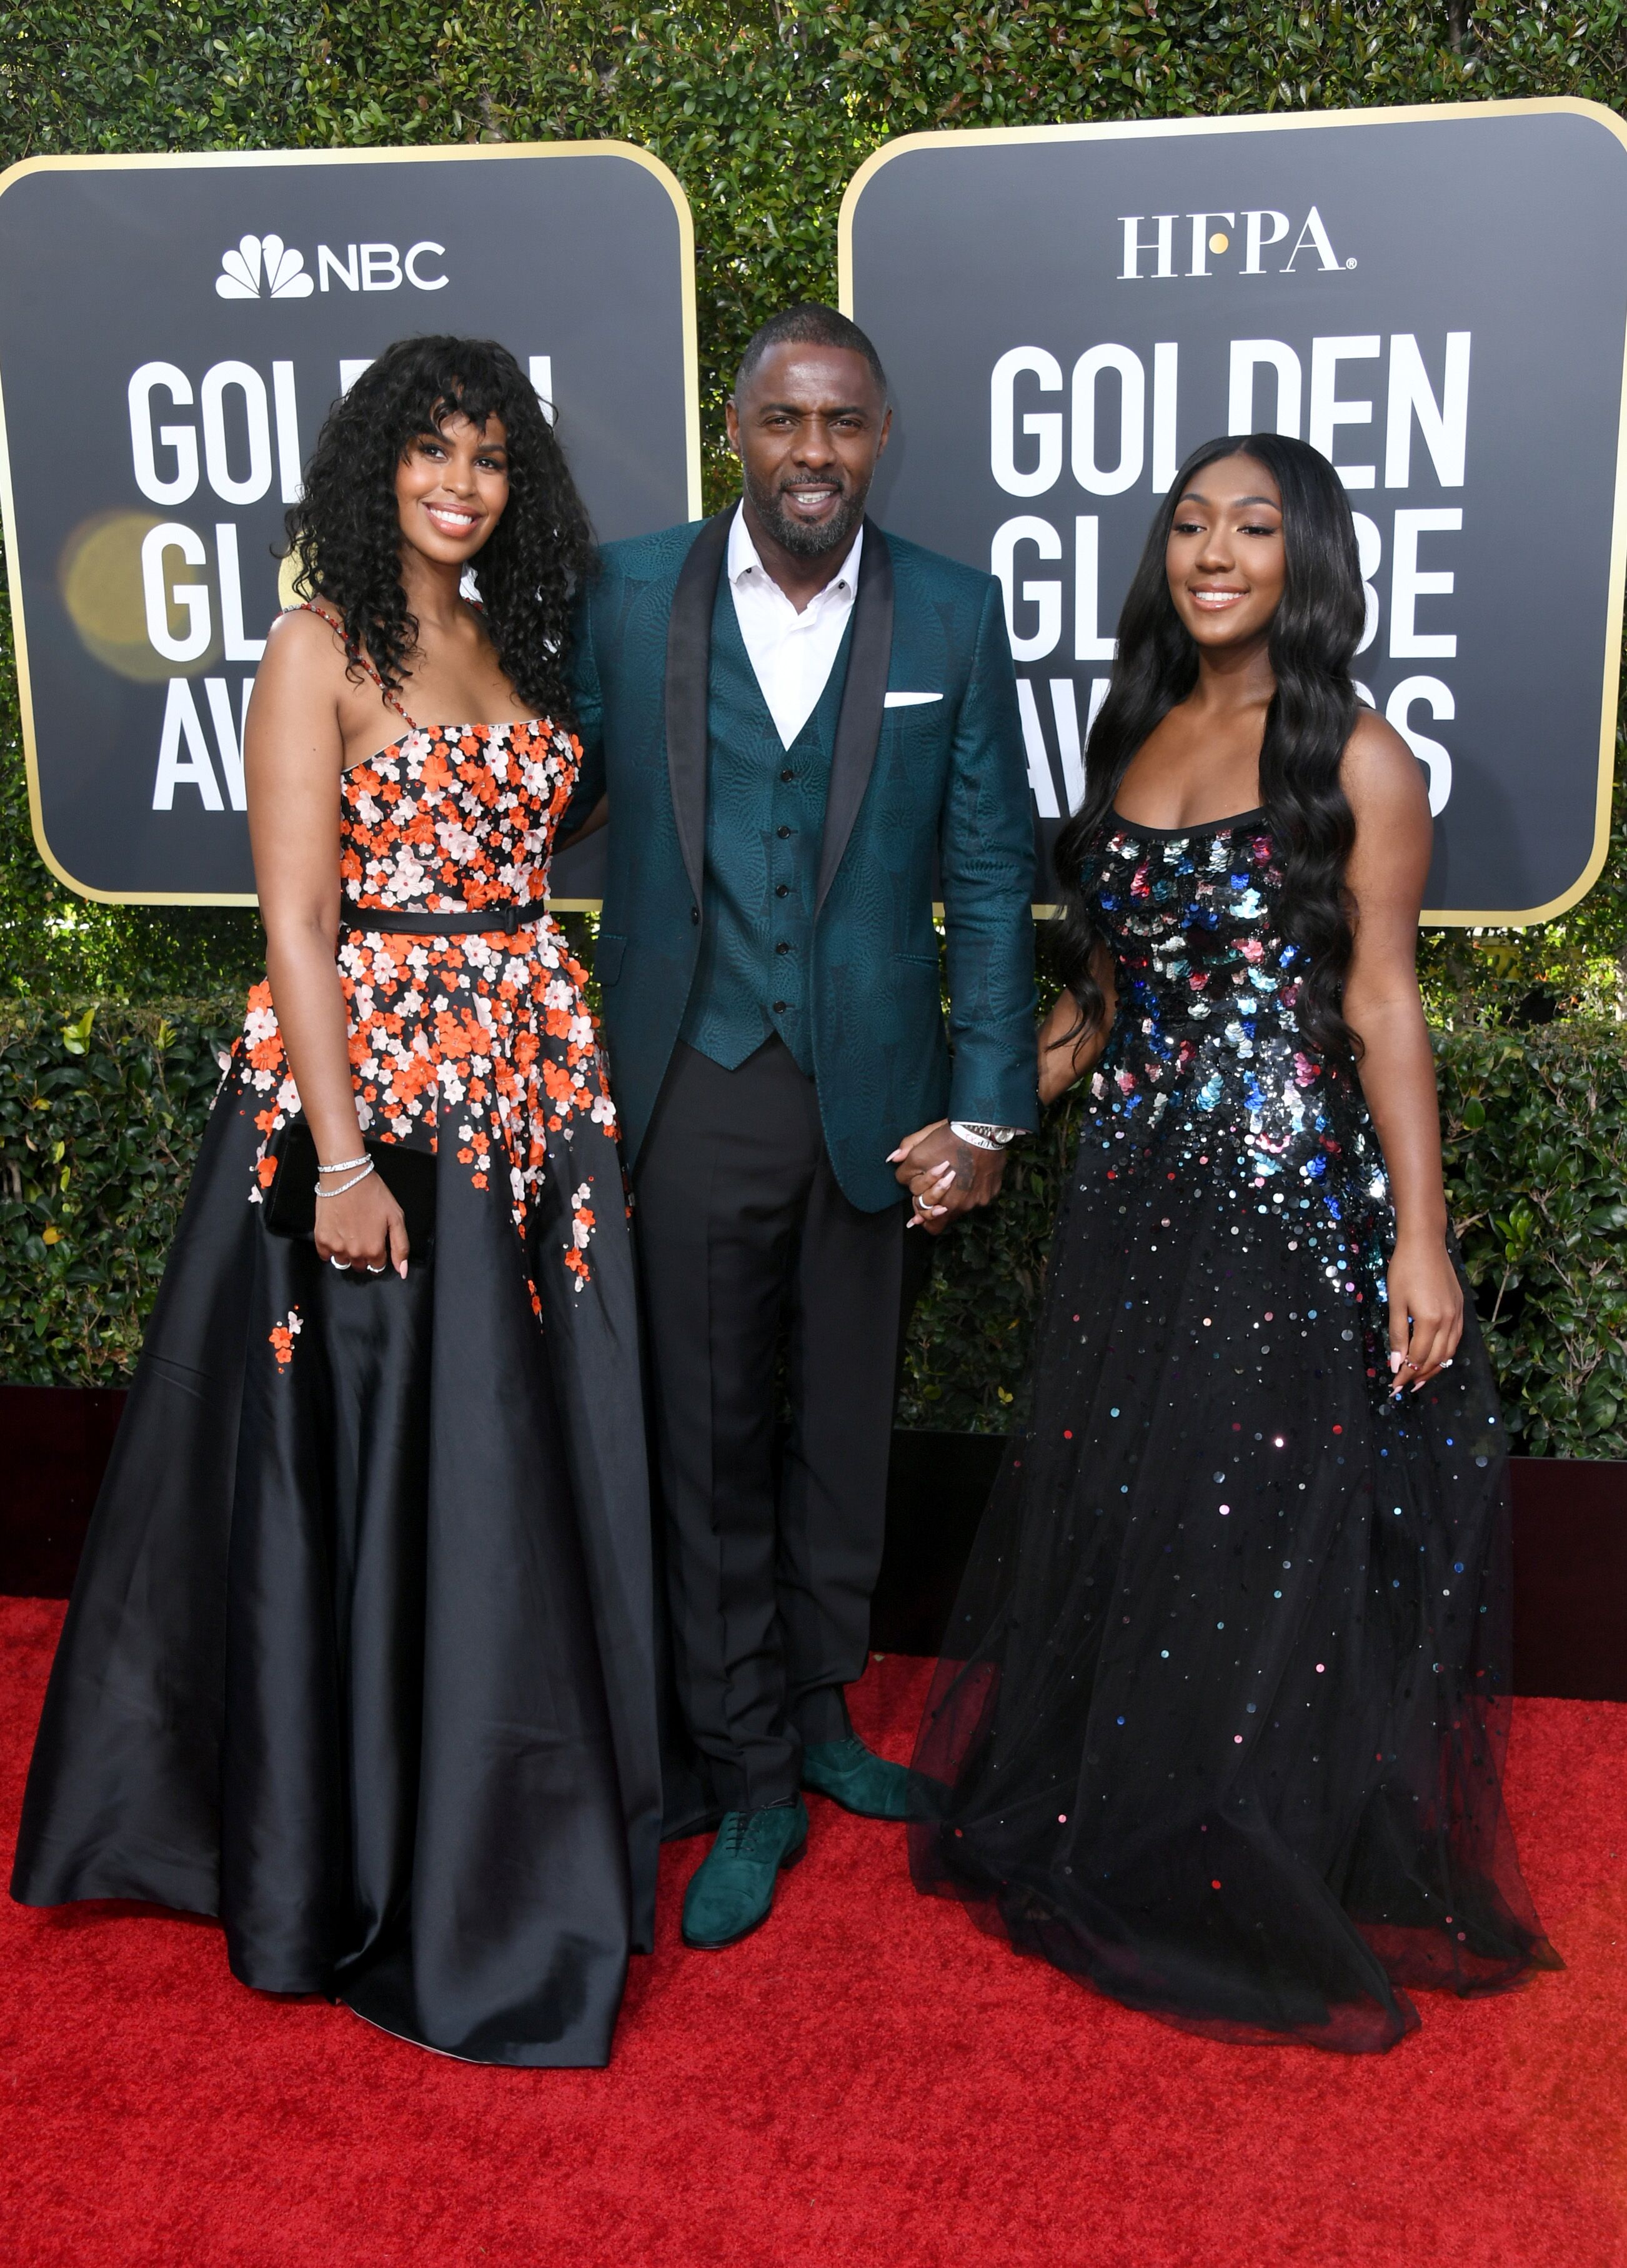 Idris Elba, his wife Sabrina Dhowre, and daughter Isan Elba at the 2019 Golden Globe Awards/ Source: Getty Images